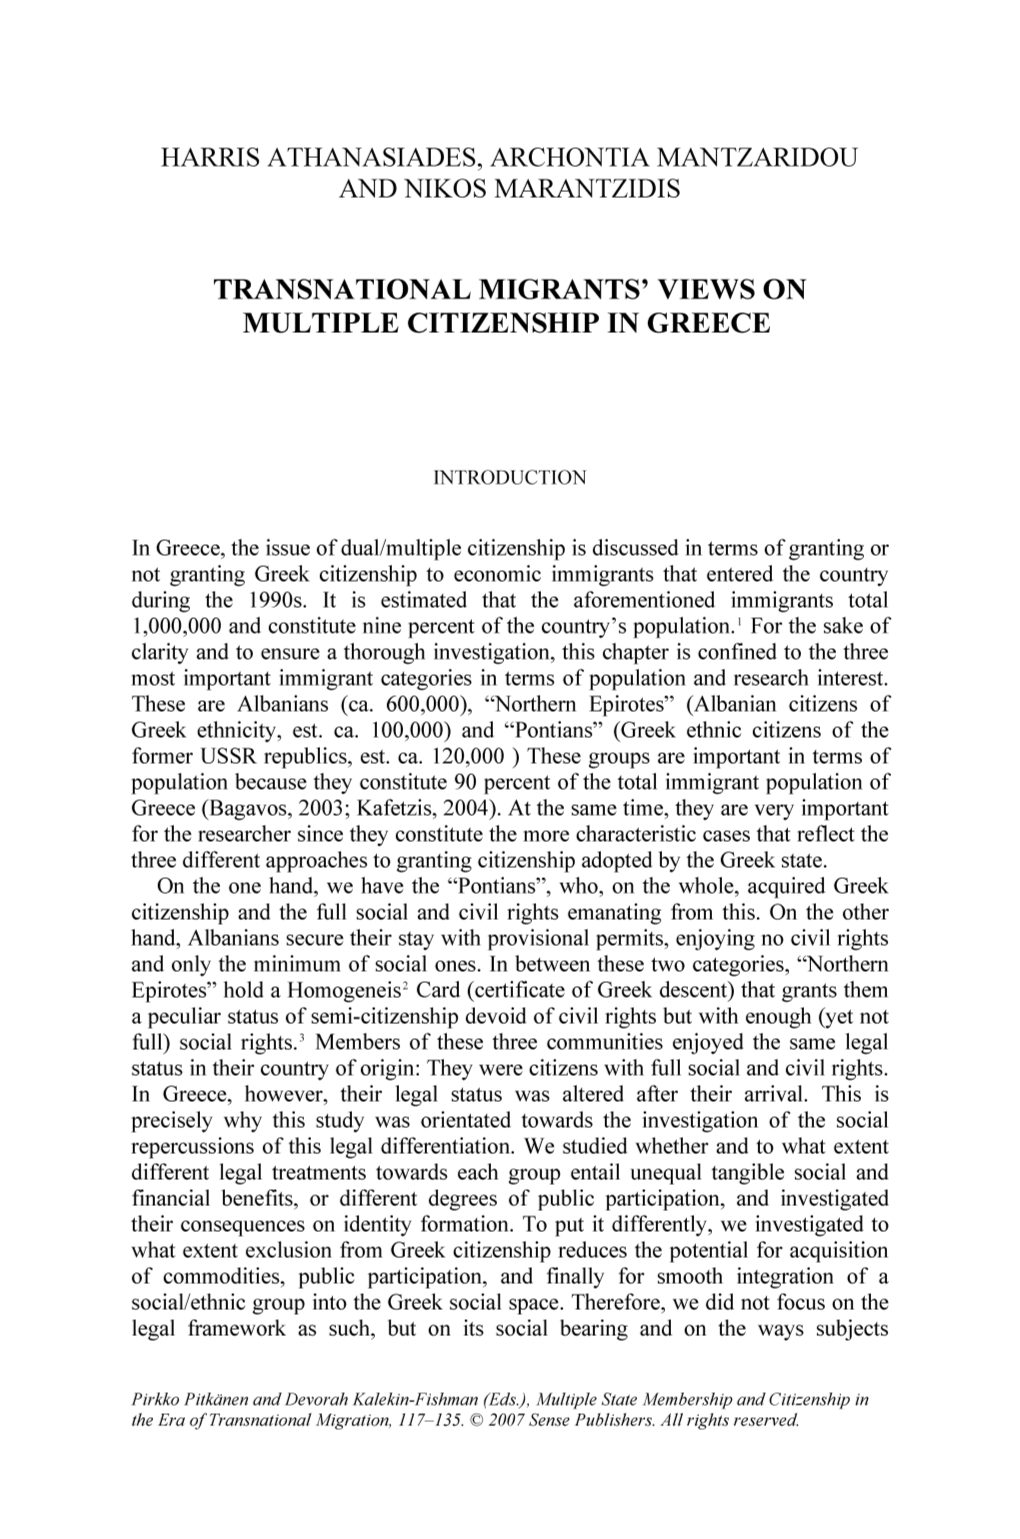 Transnational Migrants' Views on Multiple Citizenship in Greece